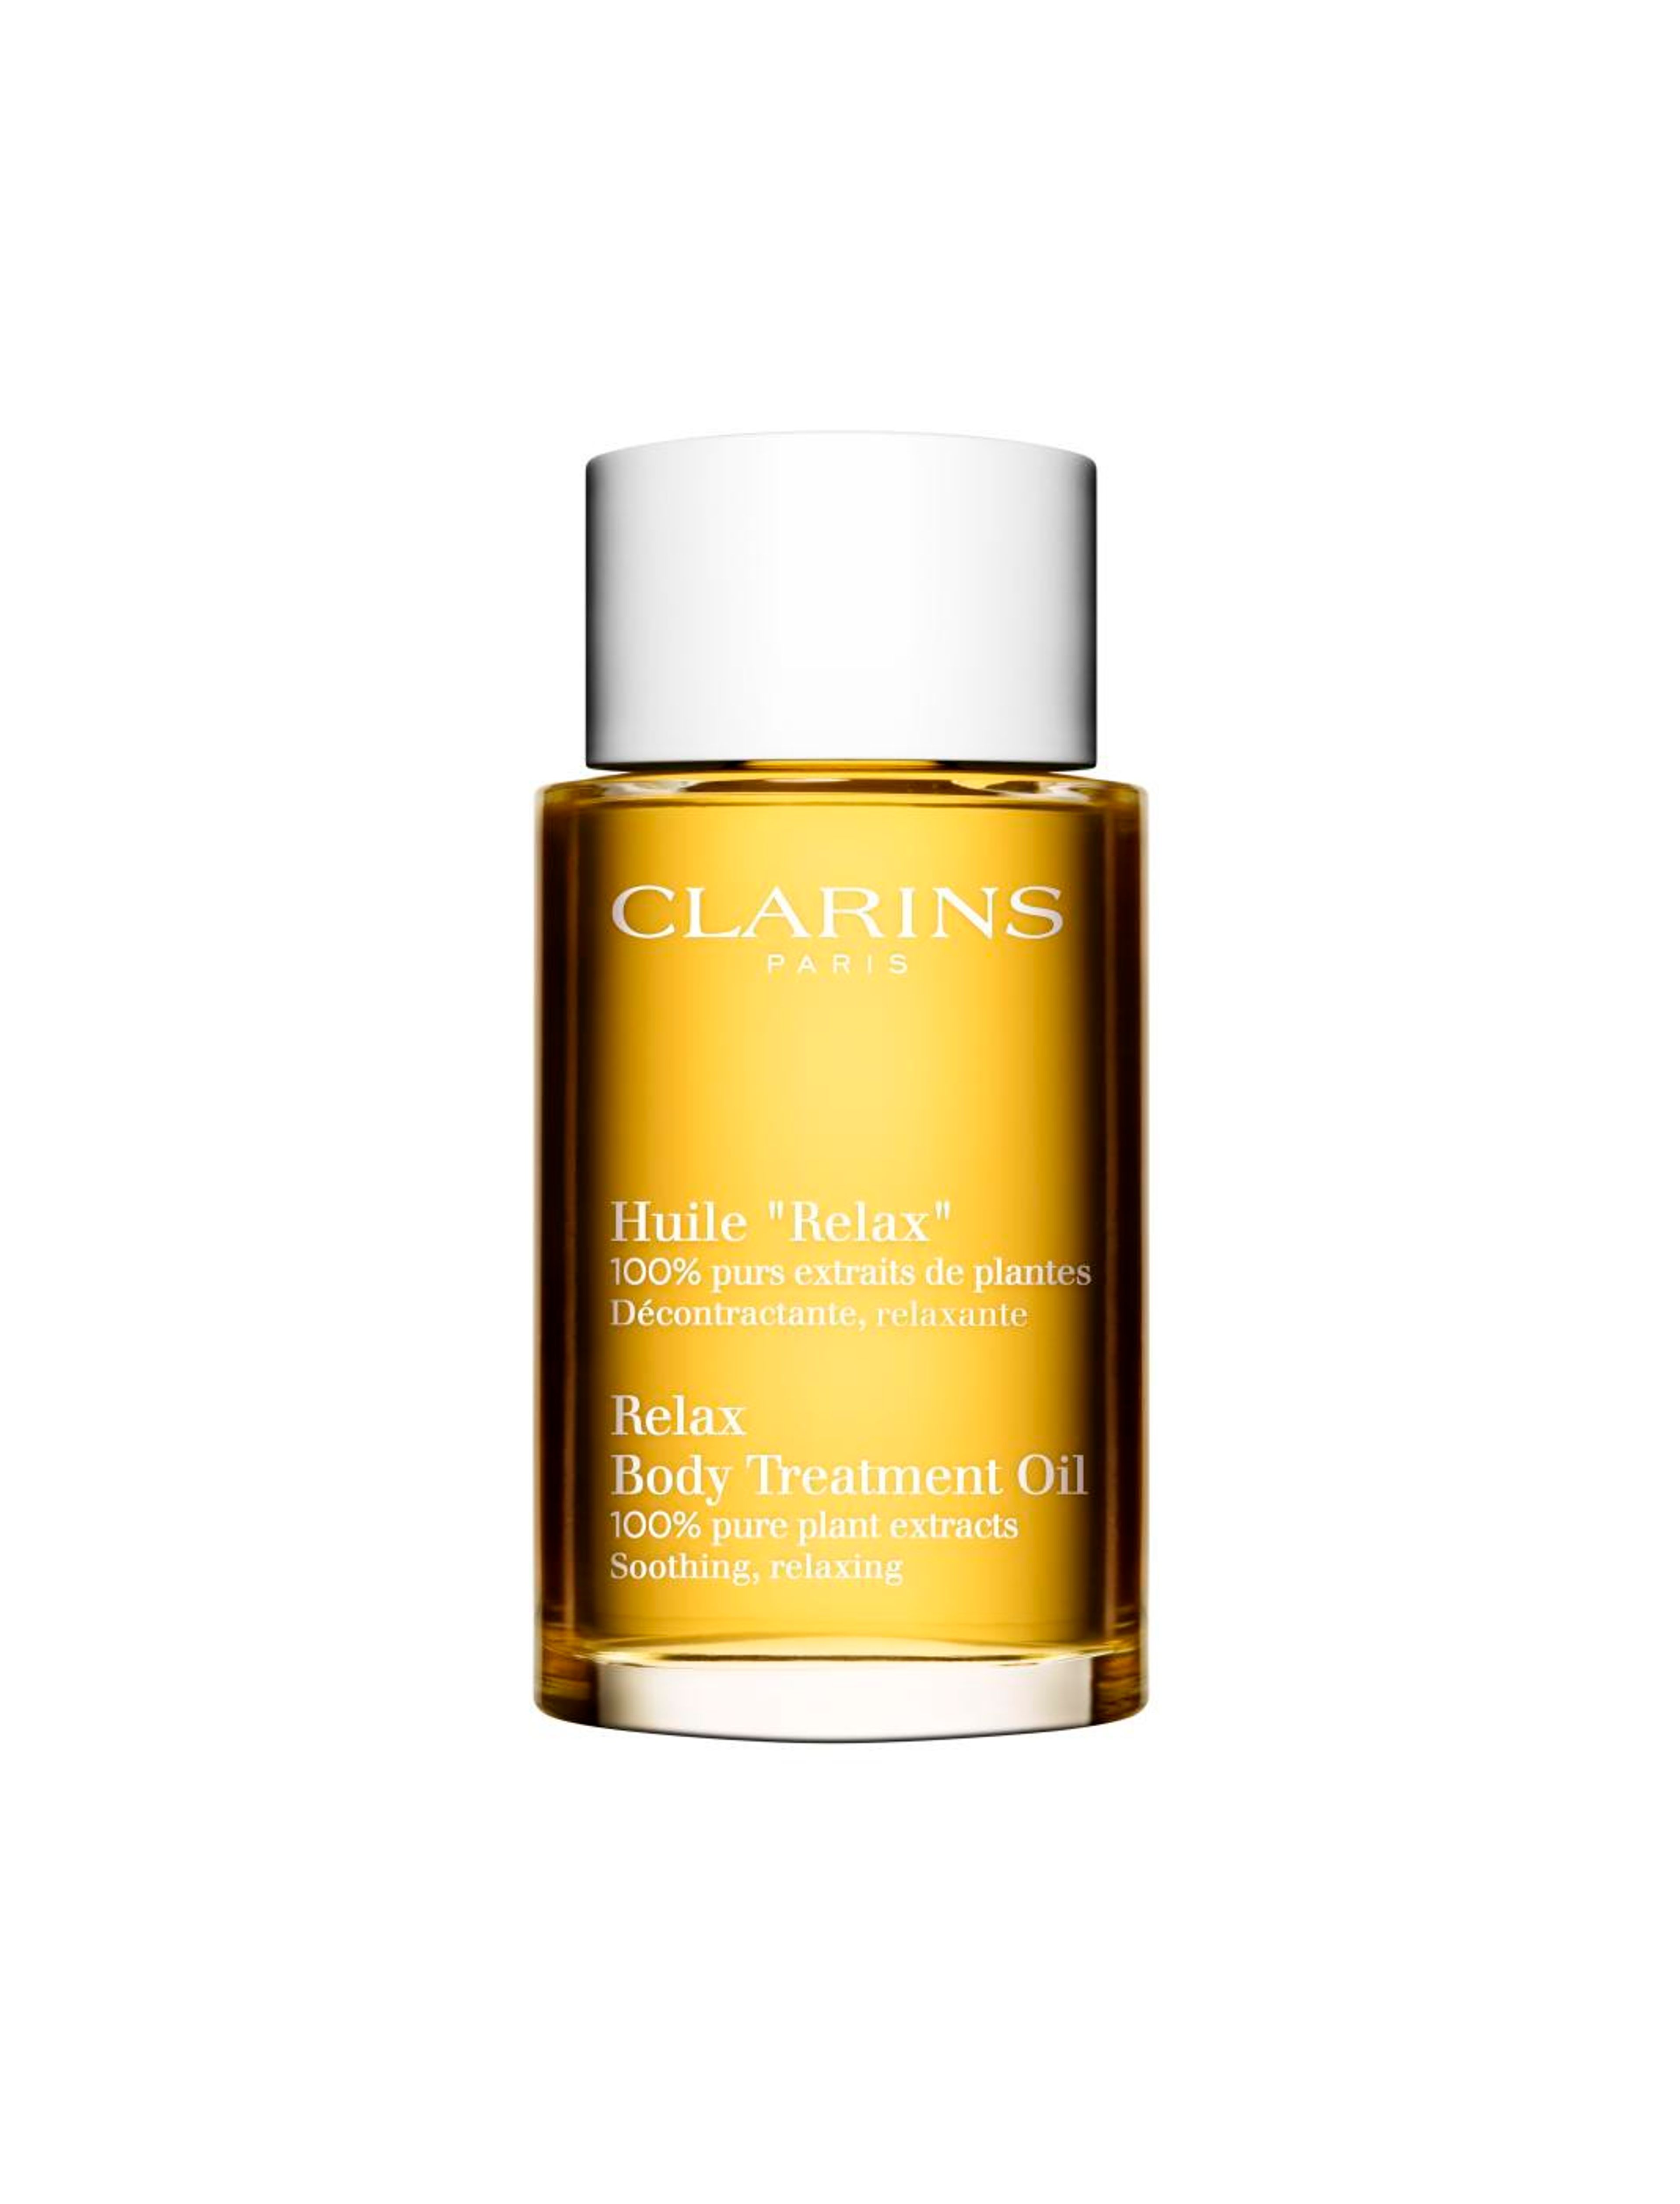 Clarins Huile "relax" 1